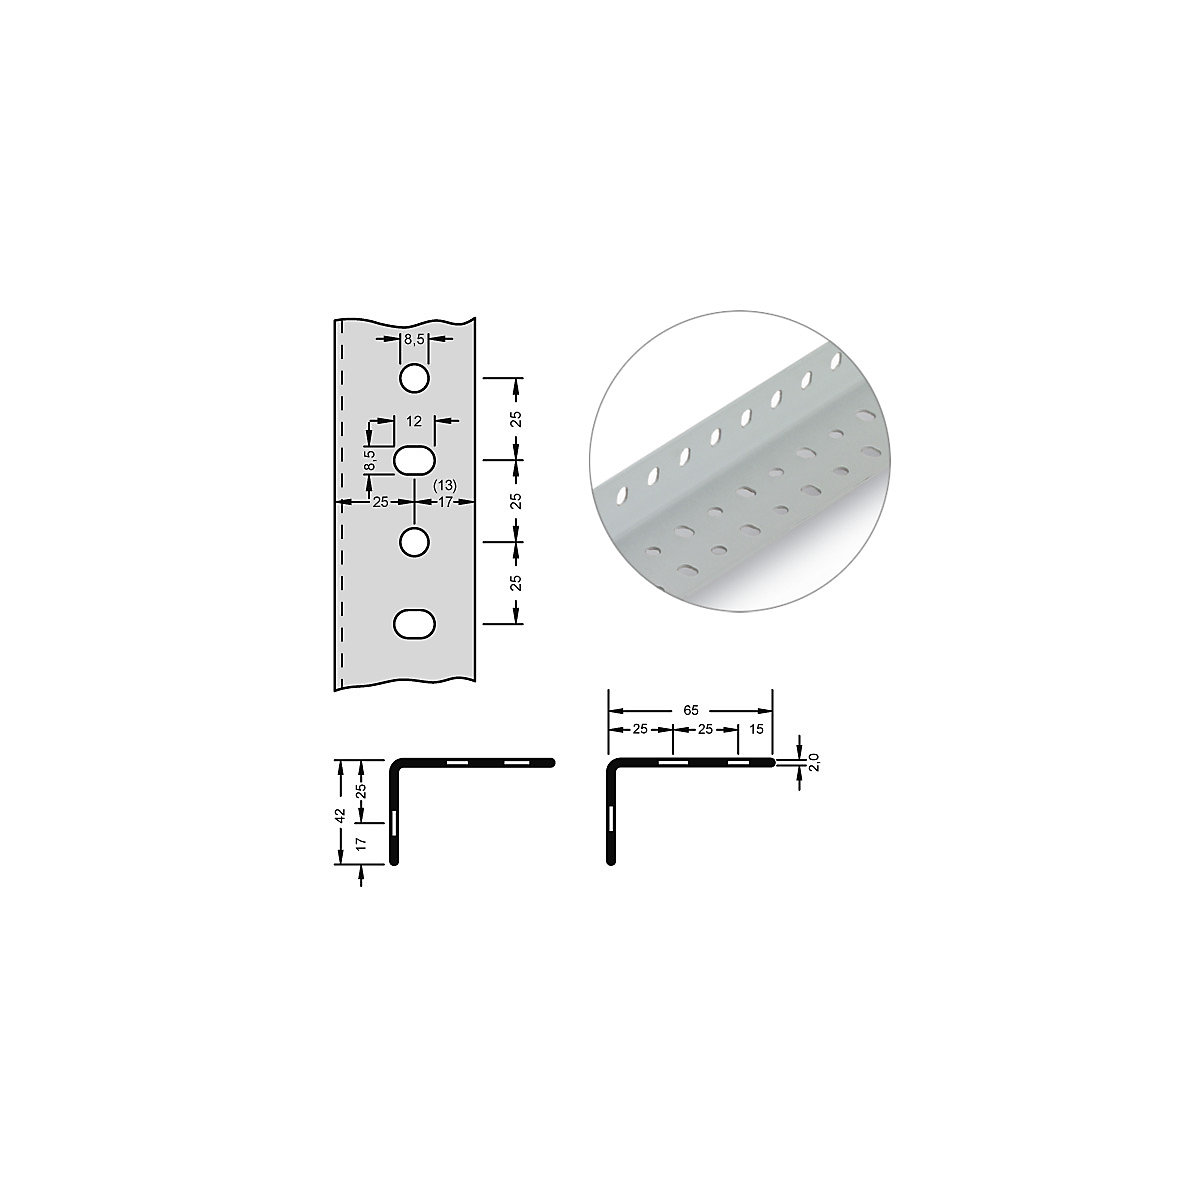 Angled steel profile for modular system – hofe, 65 x 42 x 2 mm, length 3 m, light grey, pack of 6-7